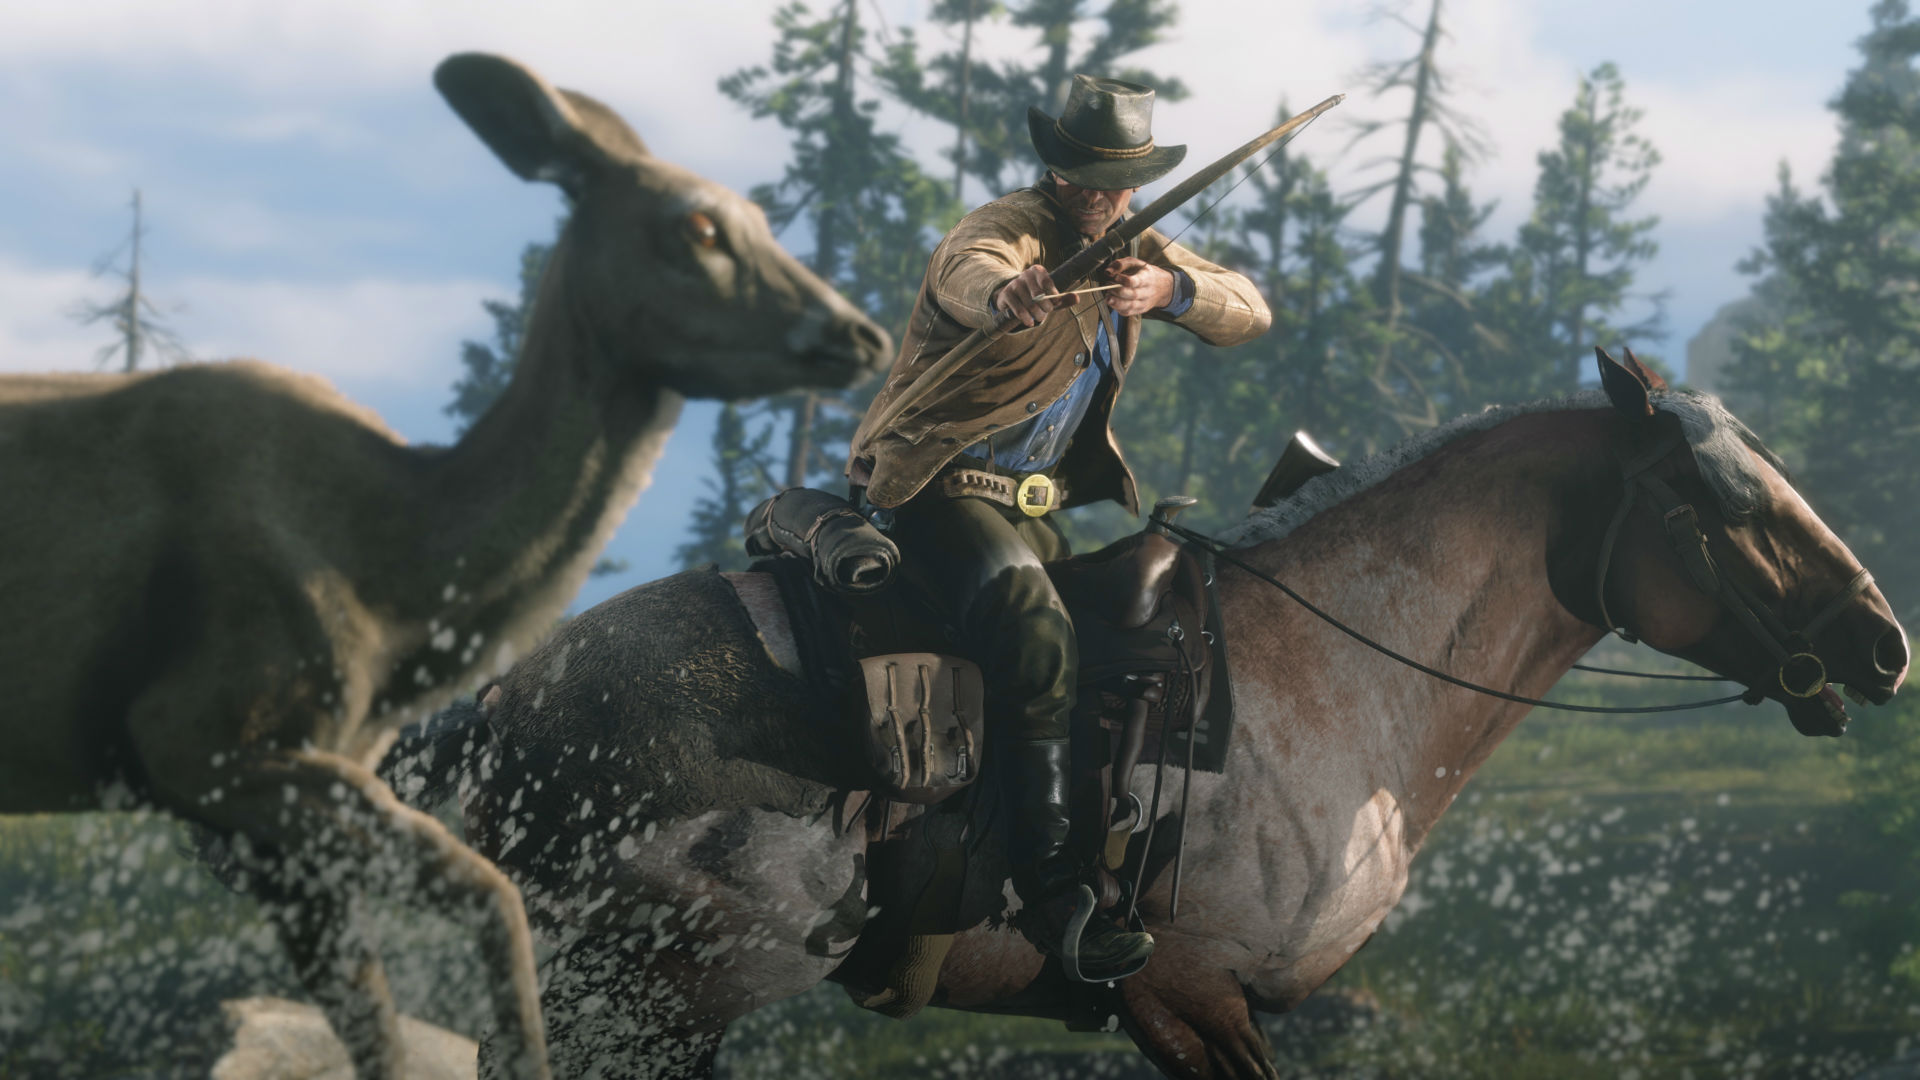 Red Dead Redemption 2 PC Screenshots, New Content, Specs Revealed 